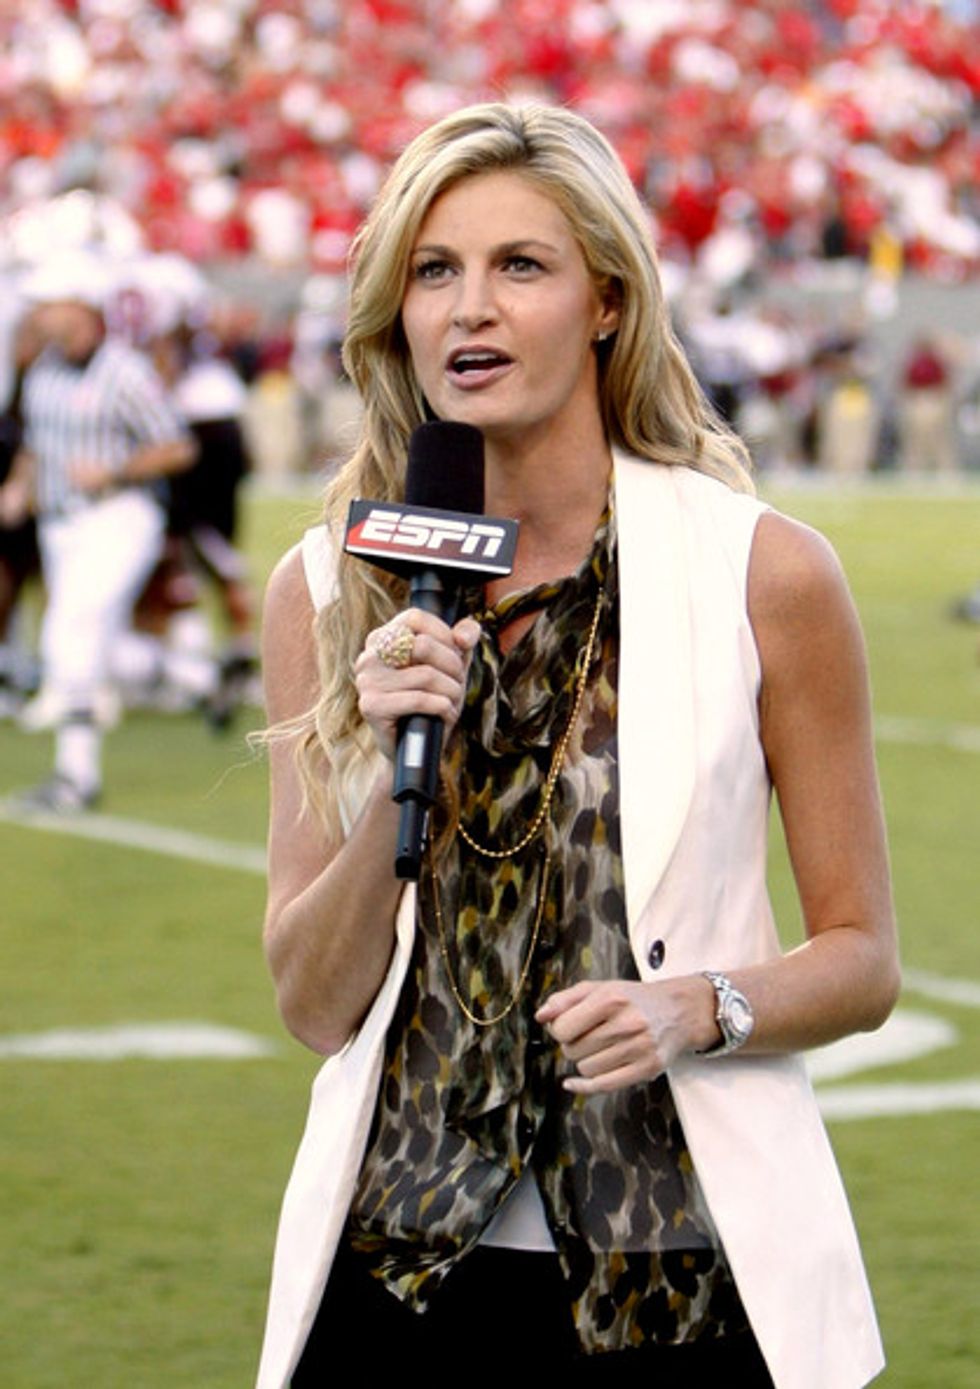 Erin Andrews' Stalking Incident Proves Women Are Not Treated As Equals